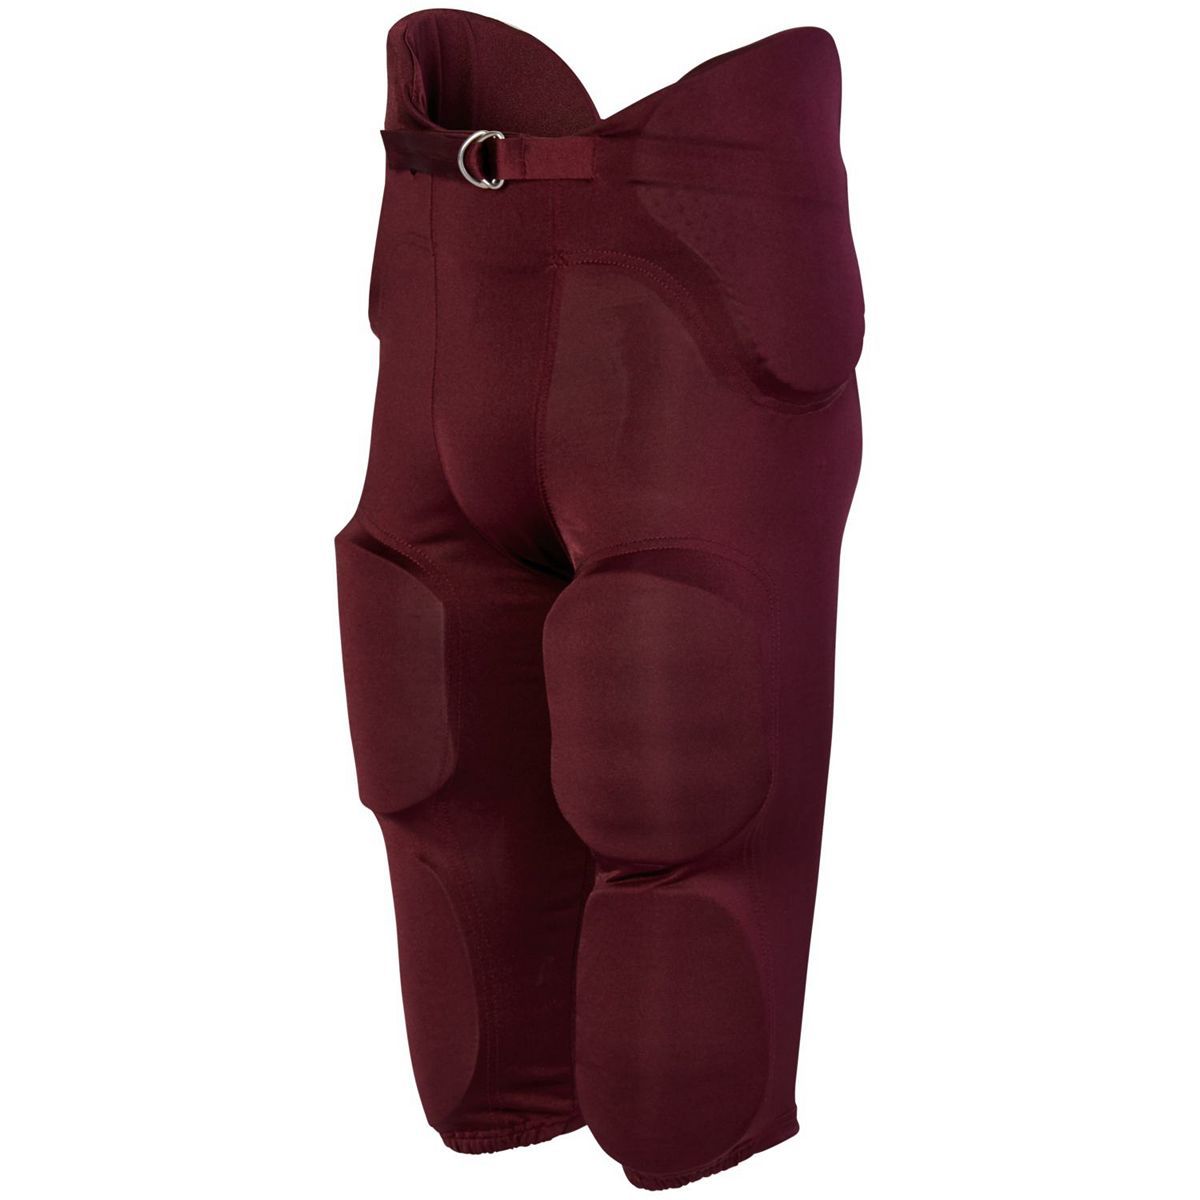 Augusta Sportswear Phantom Integrated Pant in Maroon  -Part of the Adult, Adult-Pants, Pants, Augusta-Products, Football, All-Sports, All-Sports-1 product lines at KanaleyCreations.com